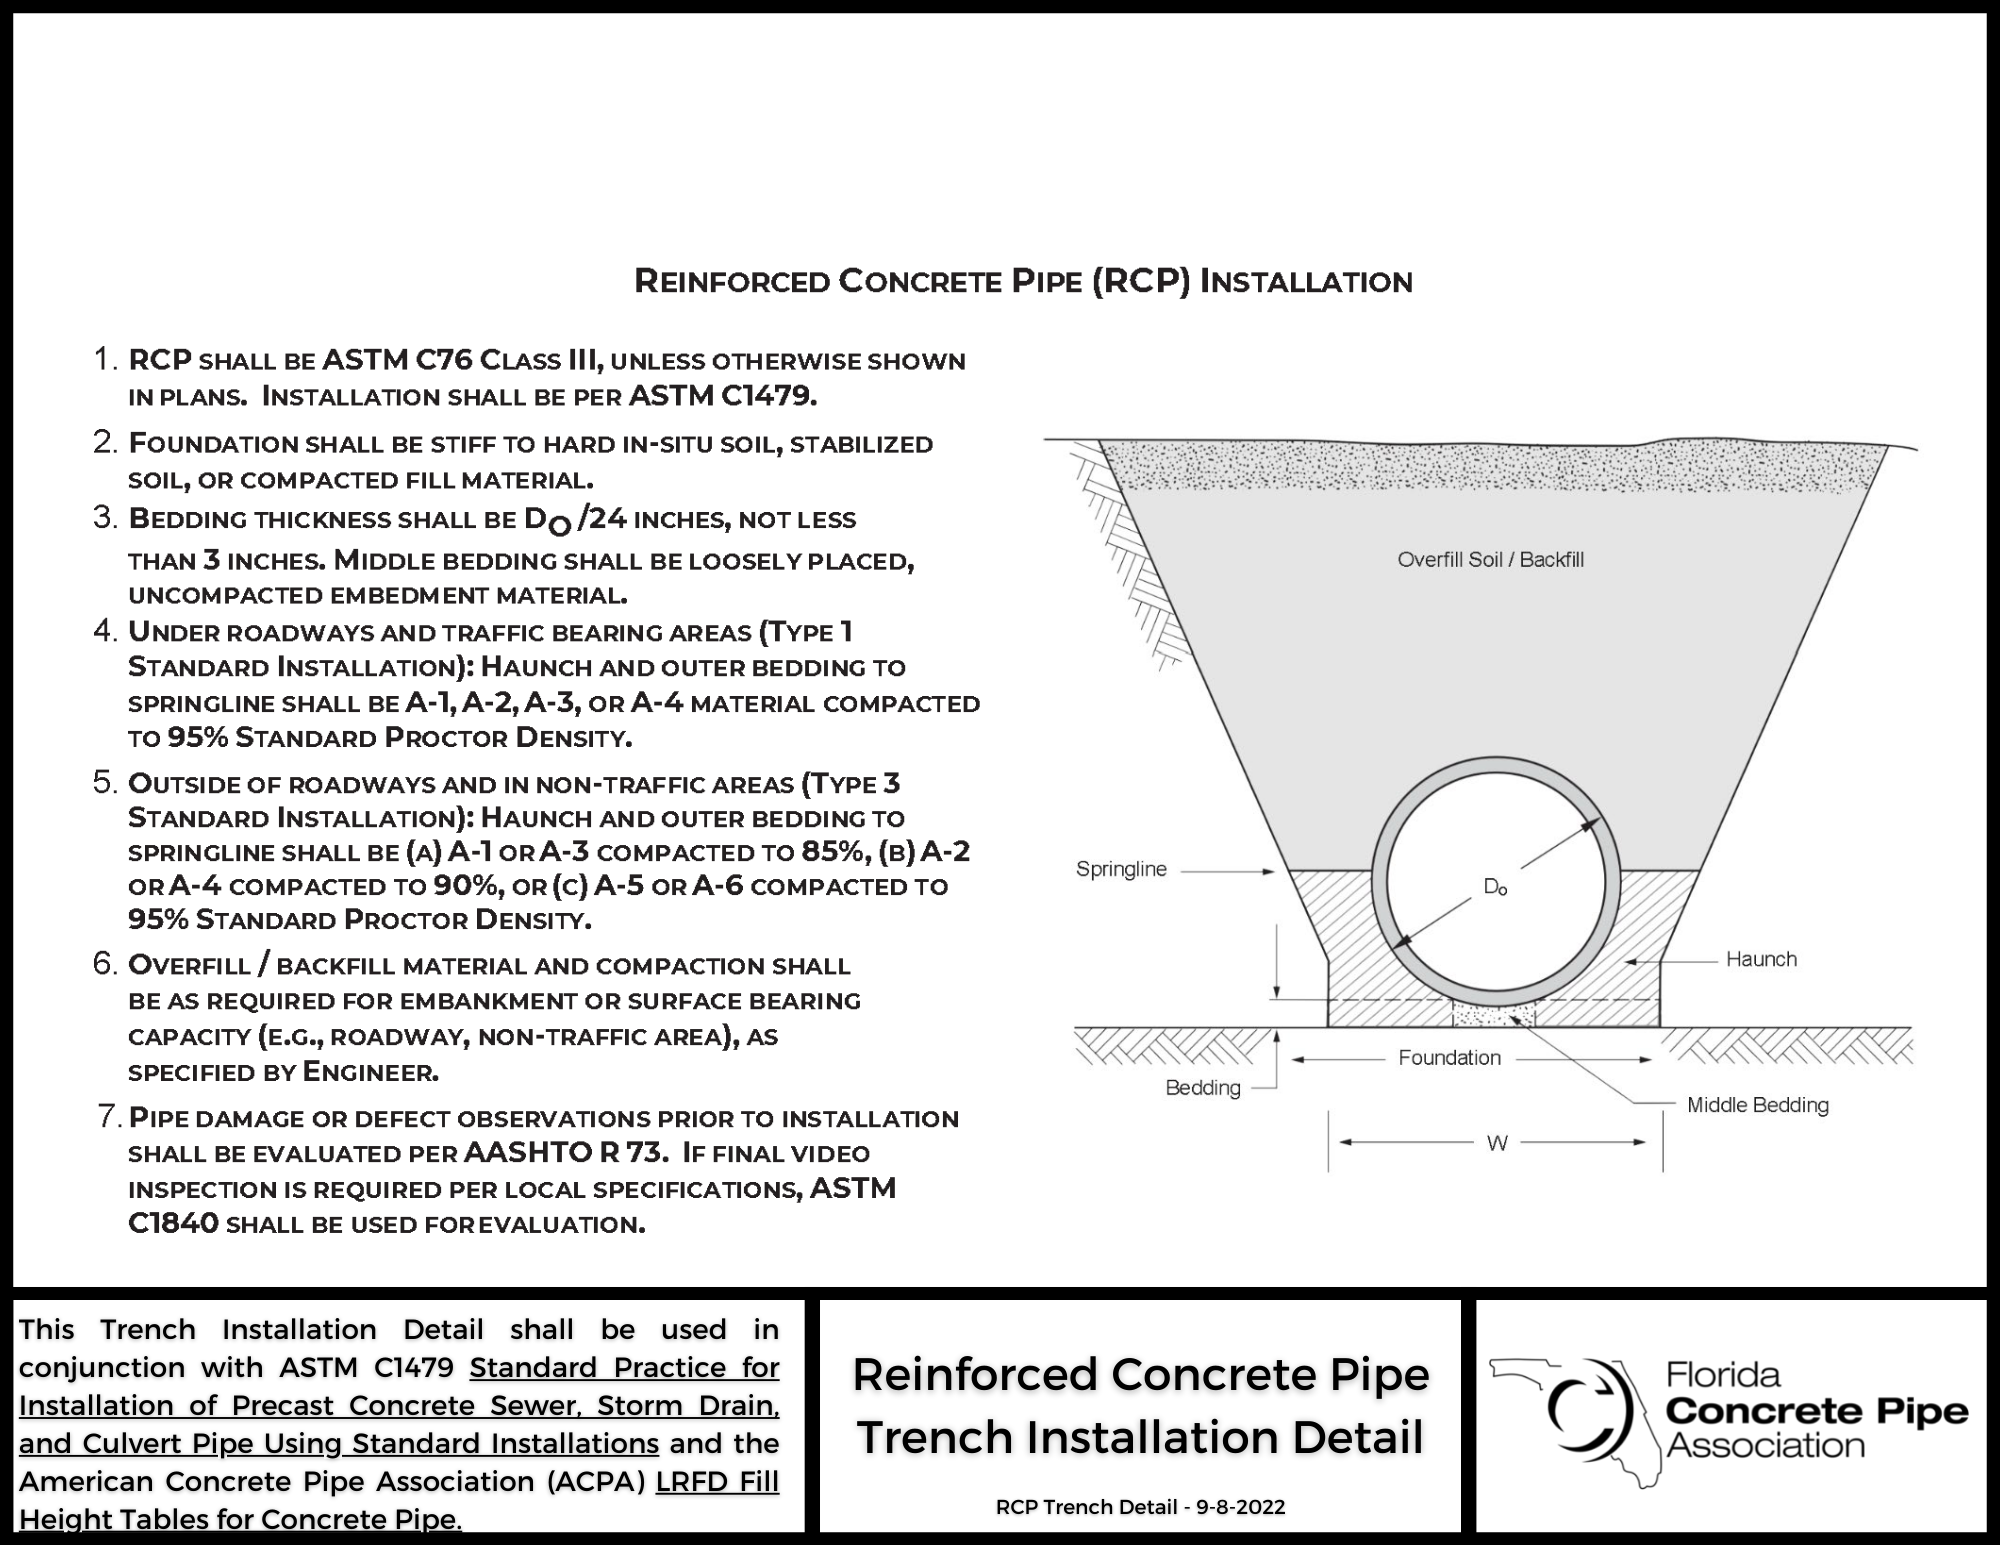 FCPA RCP Trench Detail 9-8-2022